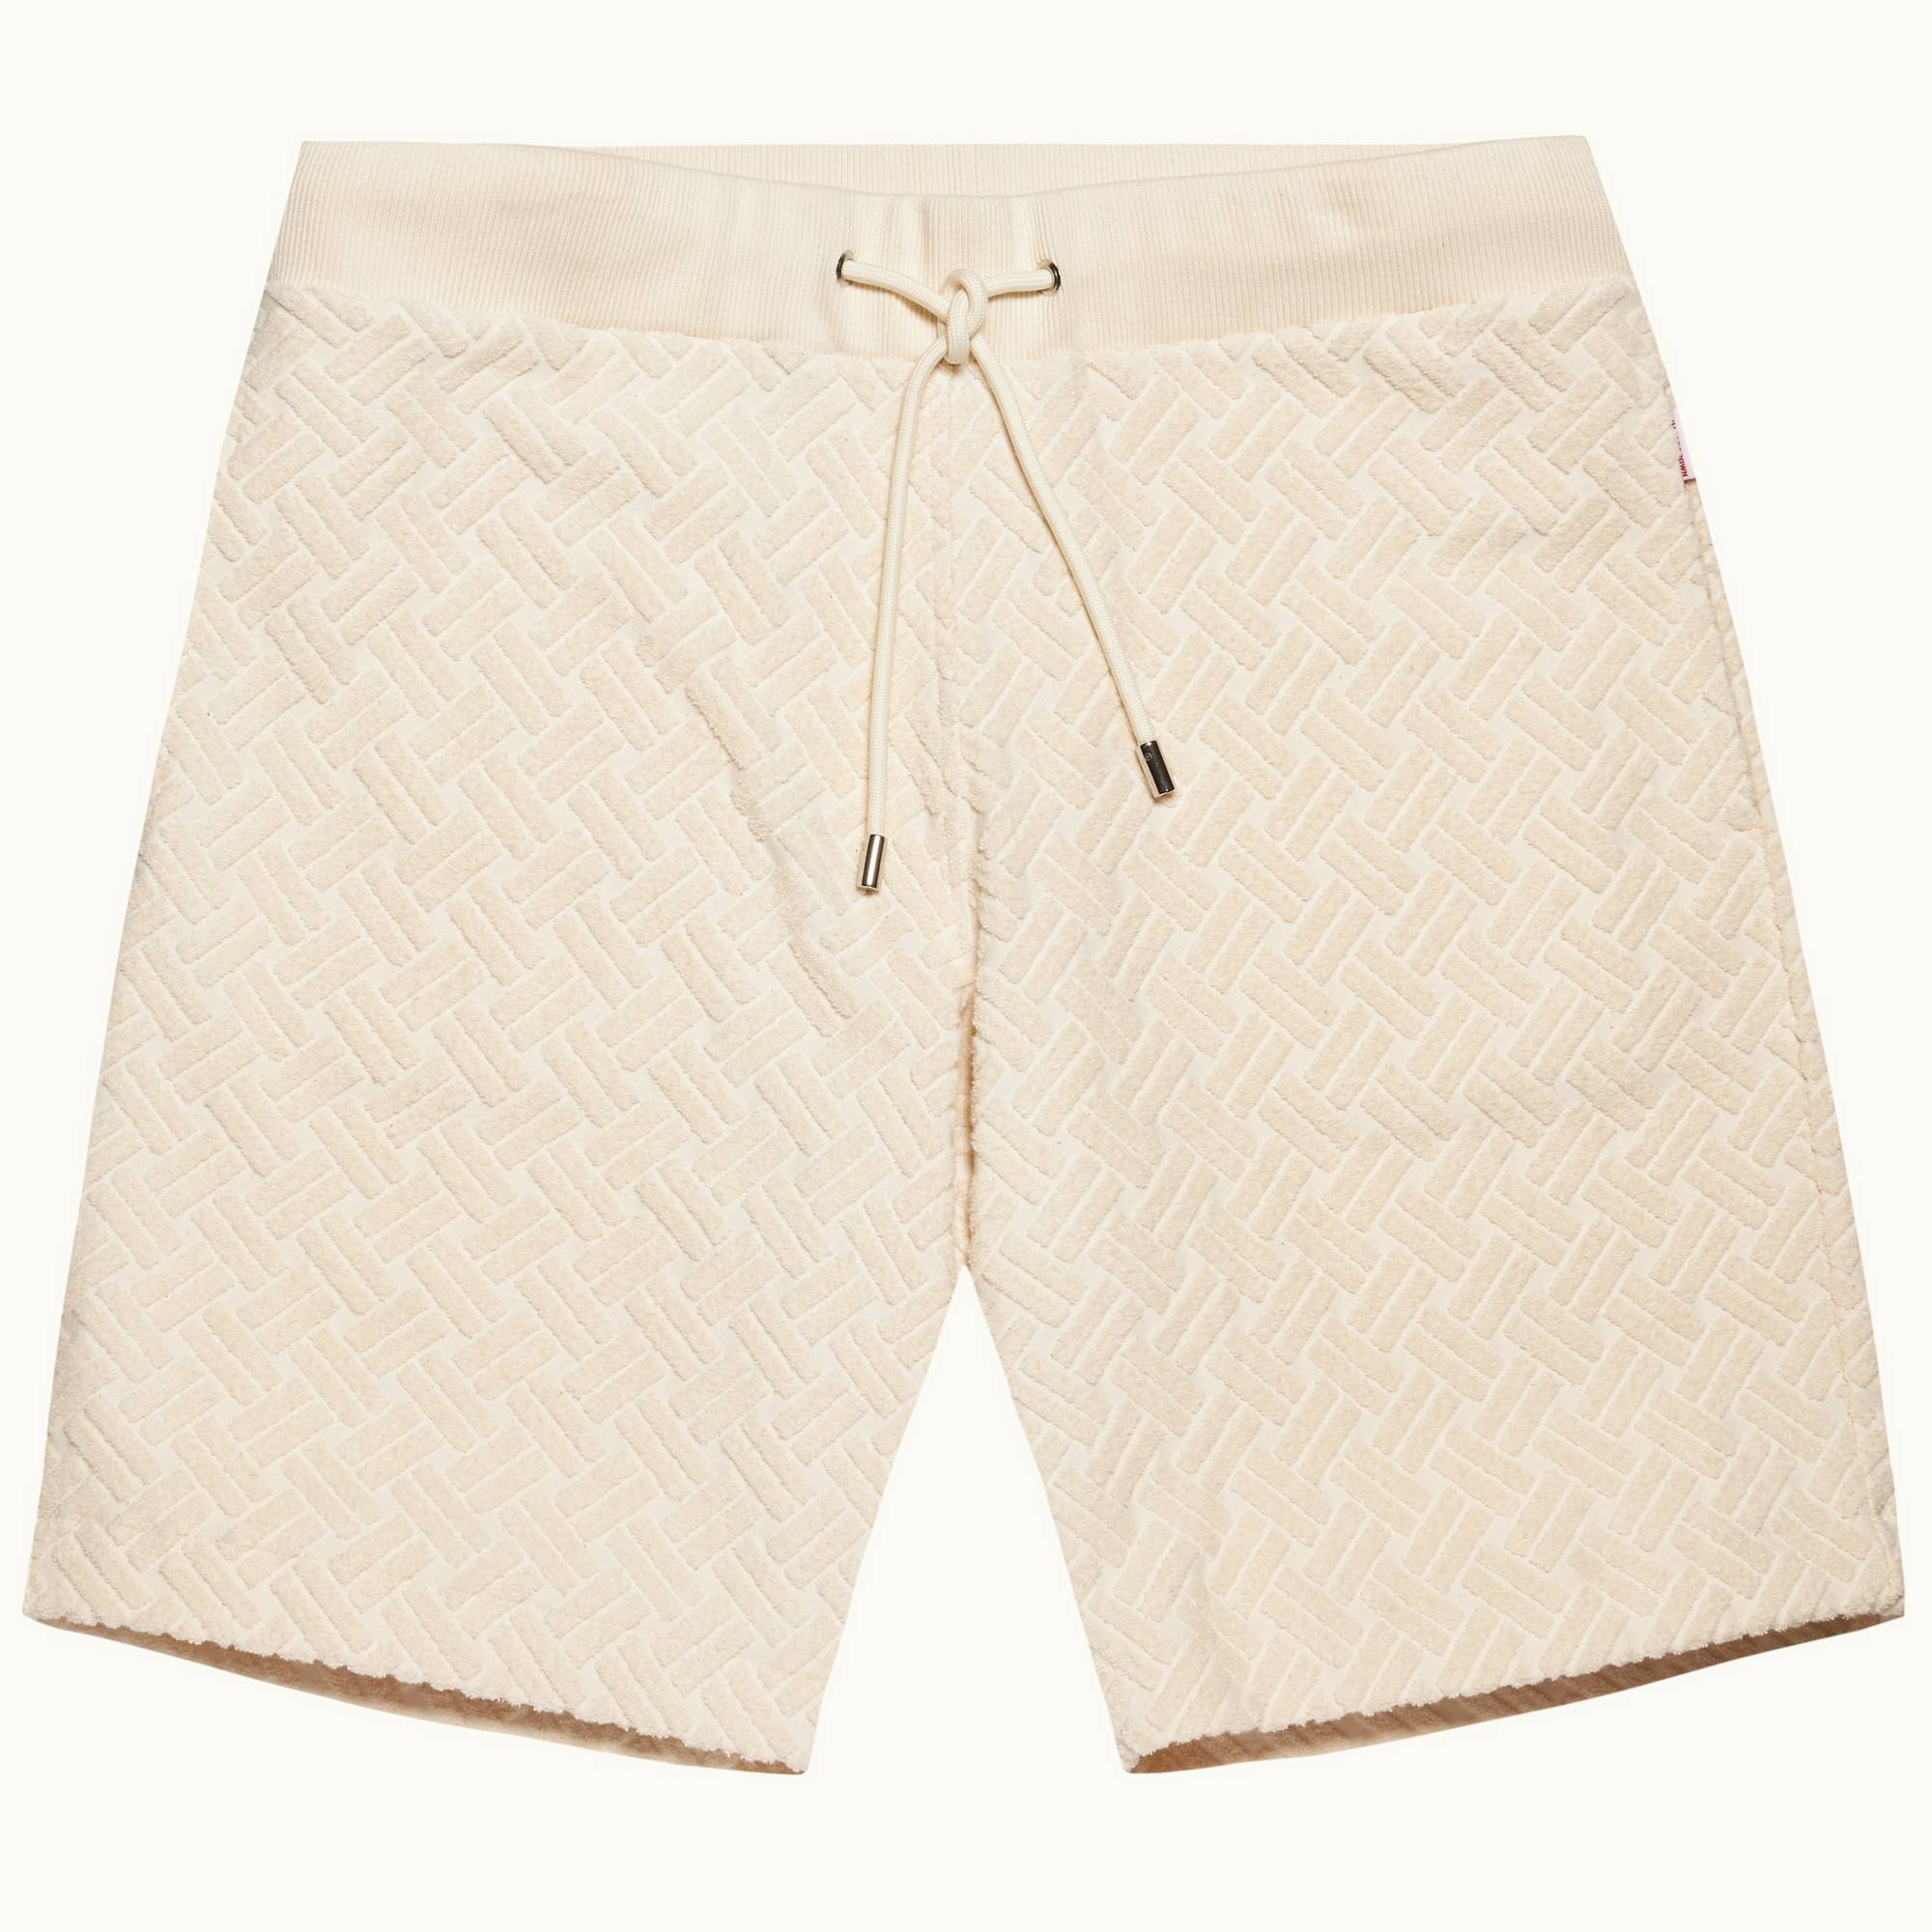 Frederick Jacquard - Mens Matchstick Jacquard Rope Towelling Classic Fit Sweat Shorts